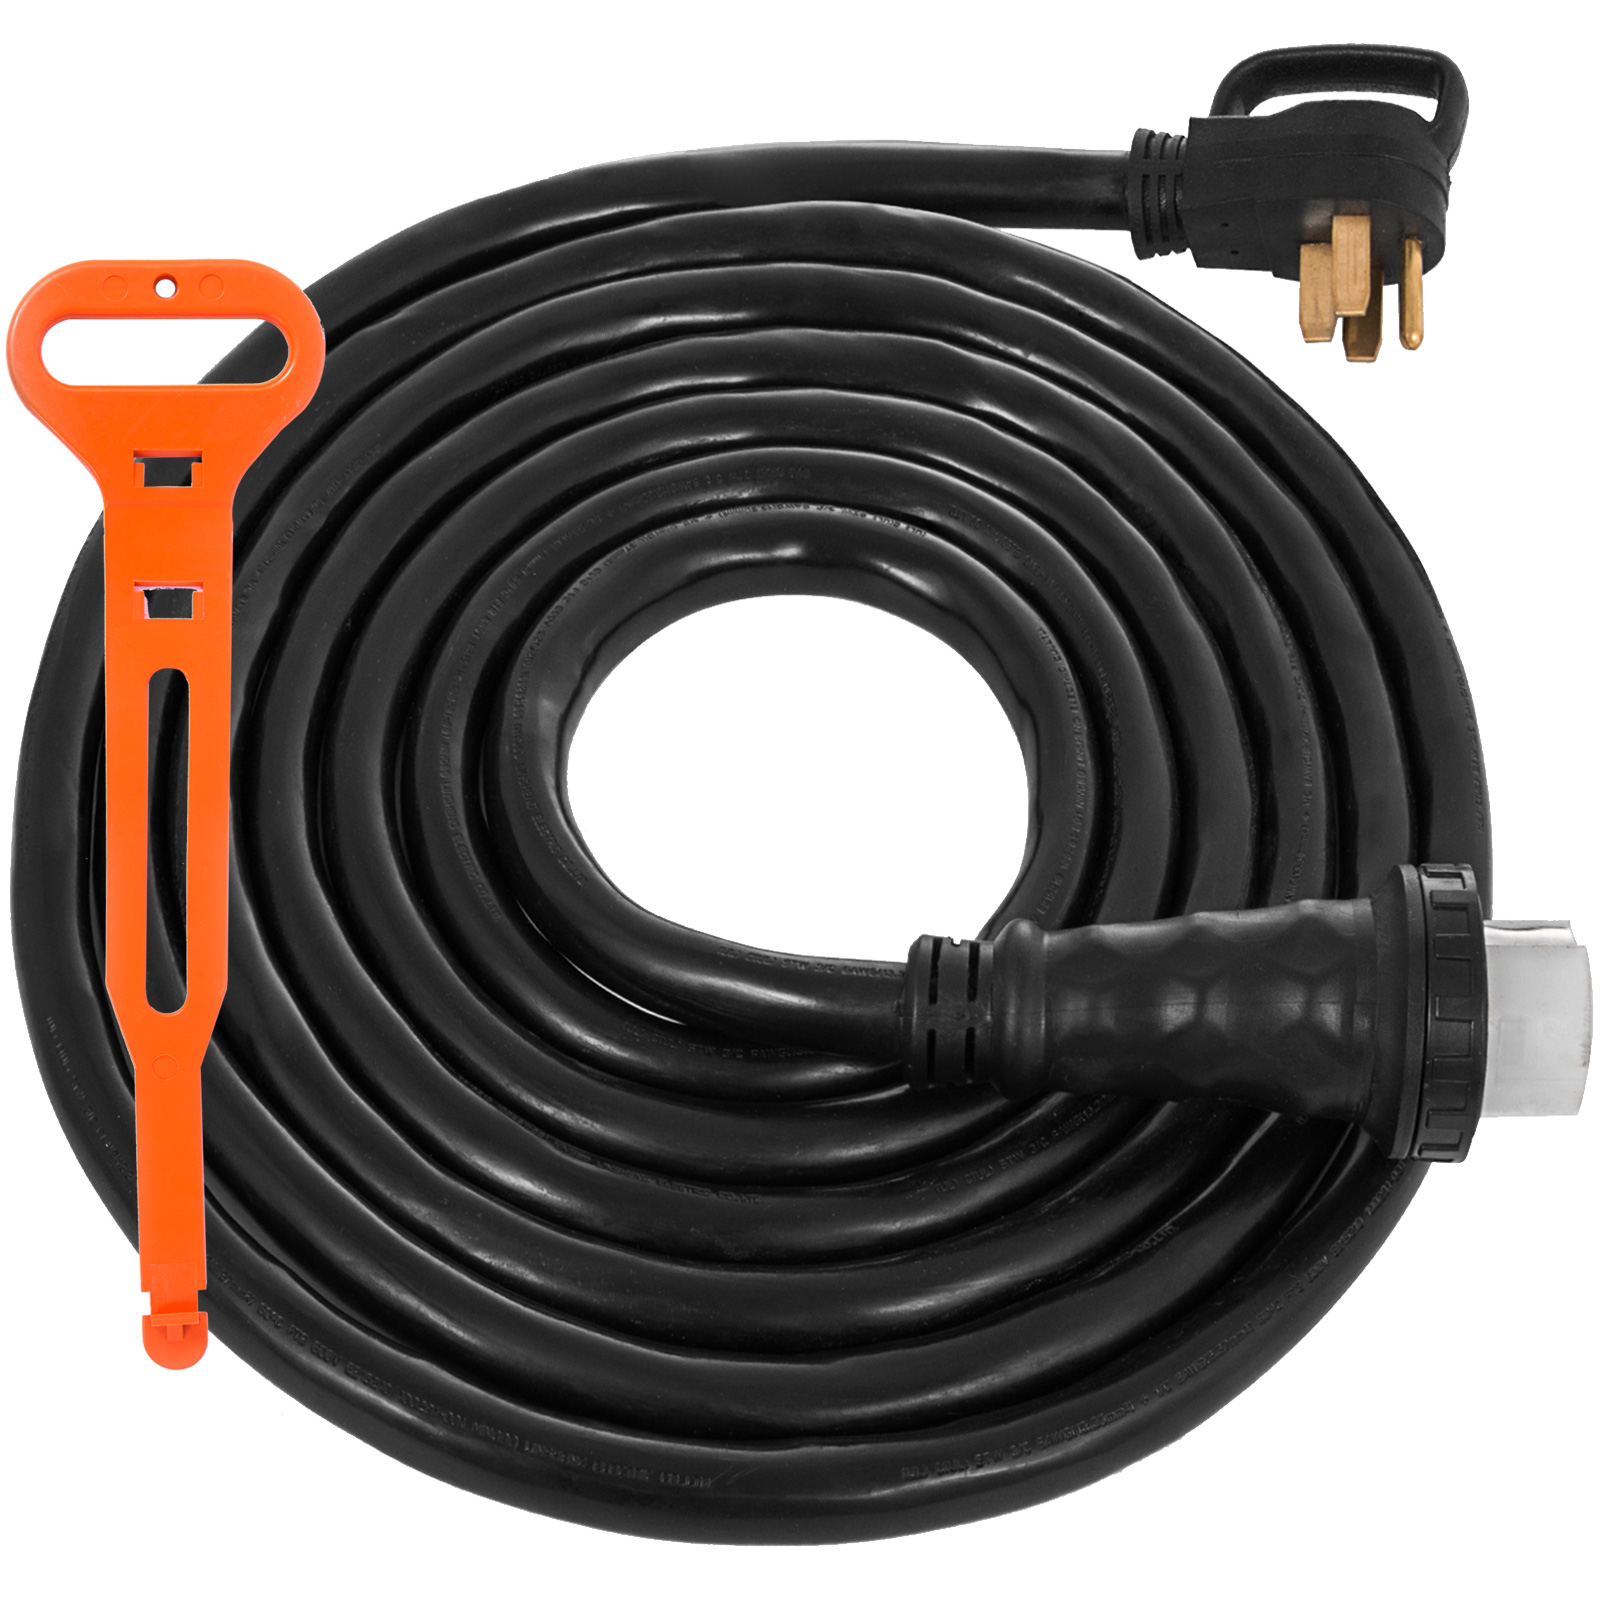 15 Foot 50 Amp RV Extension Power Cord 100% Copper Wires Trailer Motorhome New! 